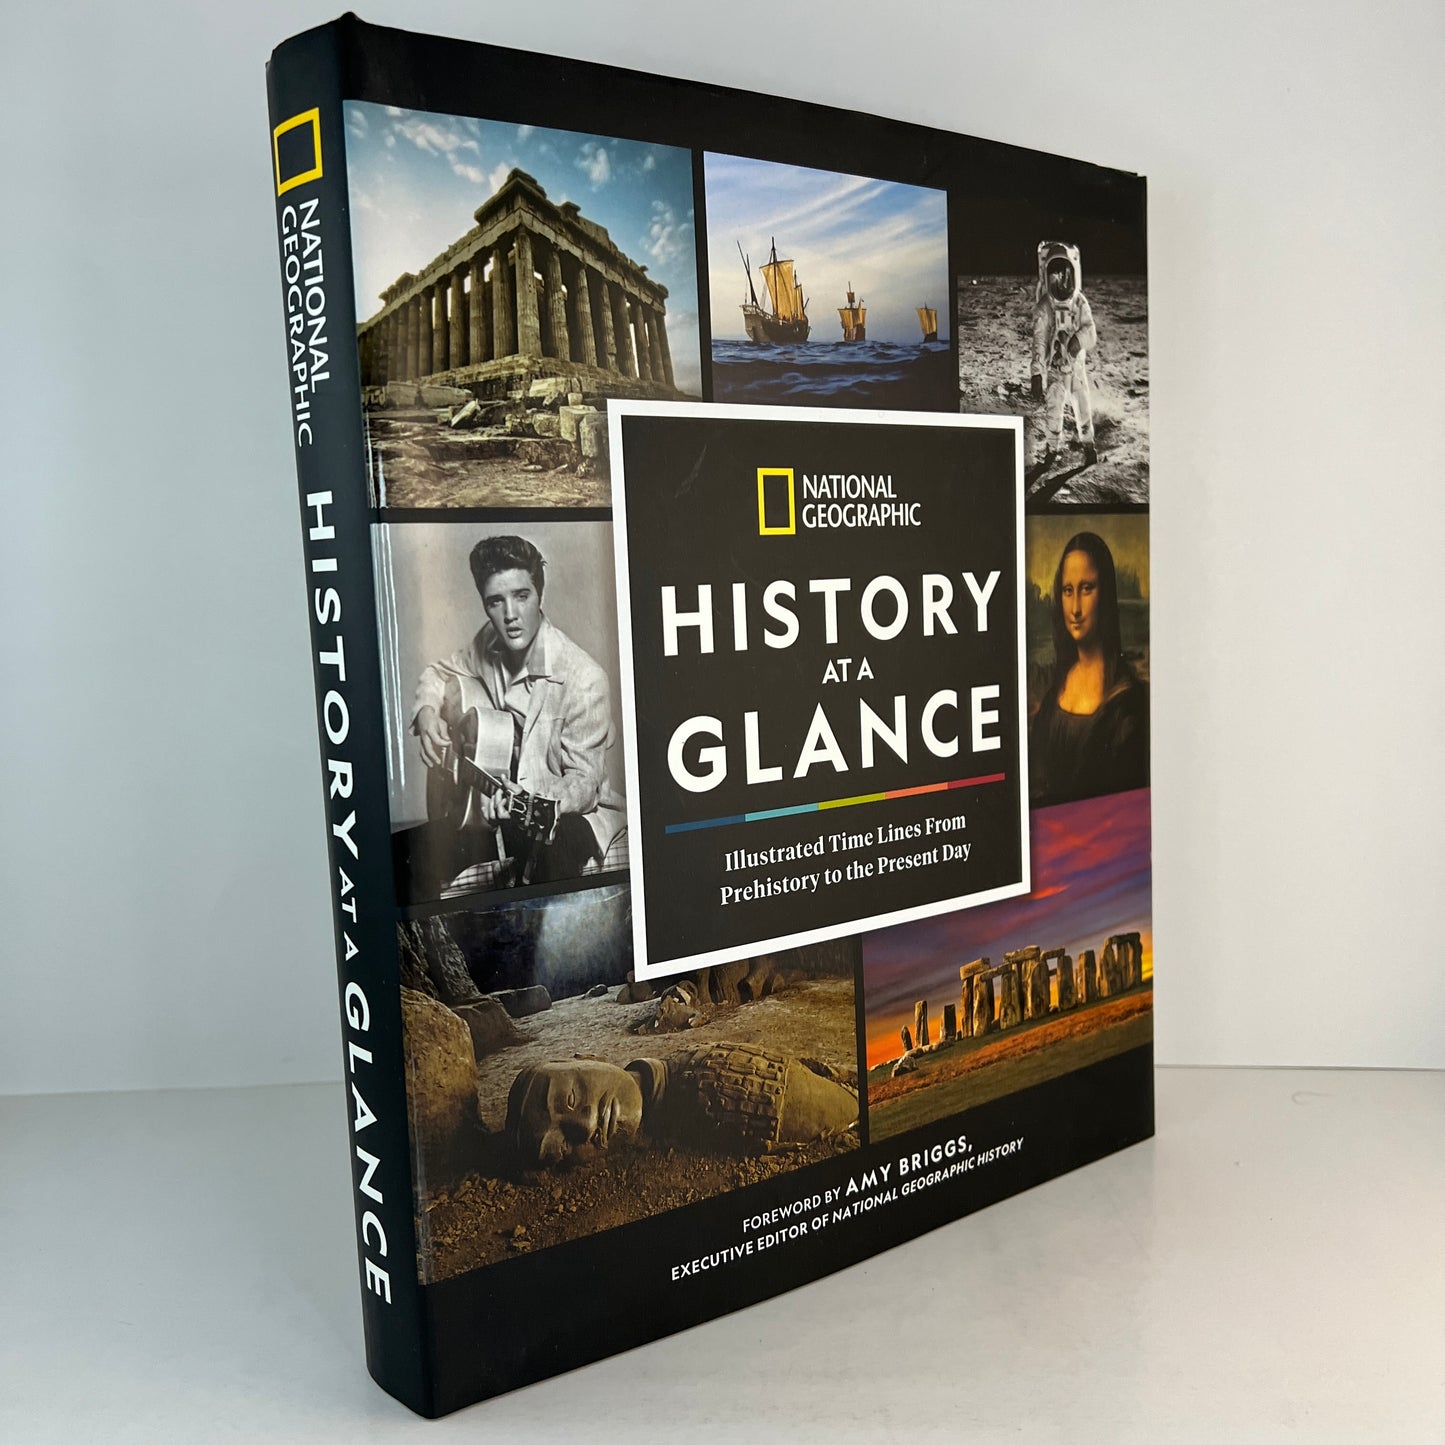 History at a Glance: Illustrated Time Lines from Prehistory to the Present Day